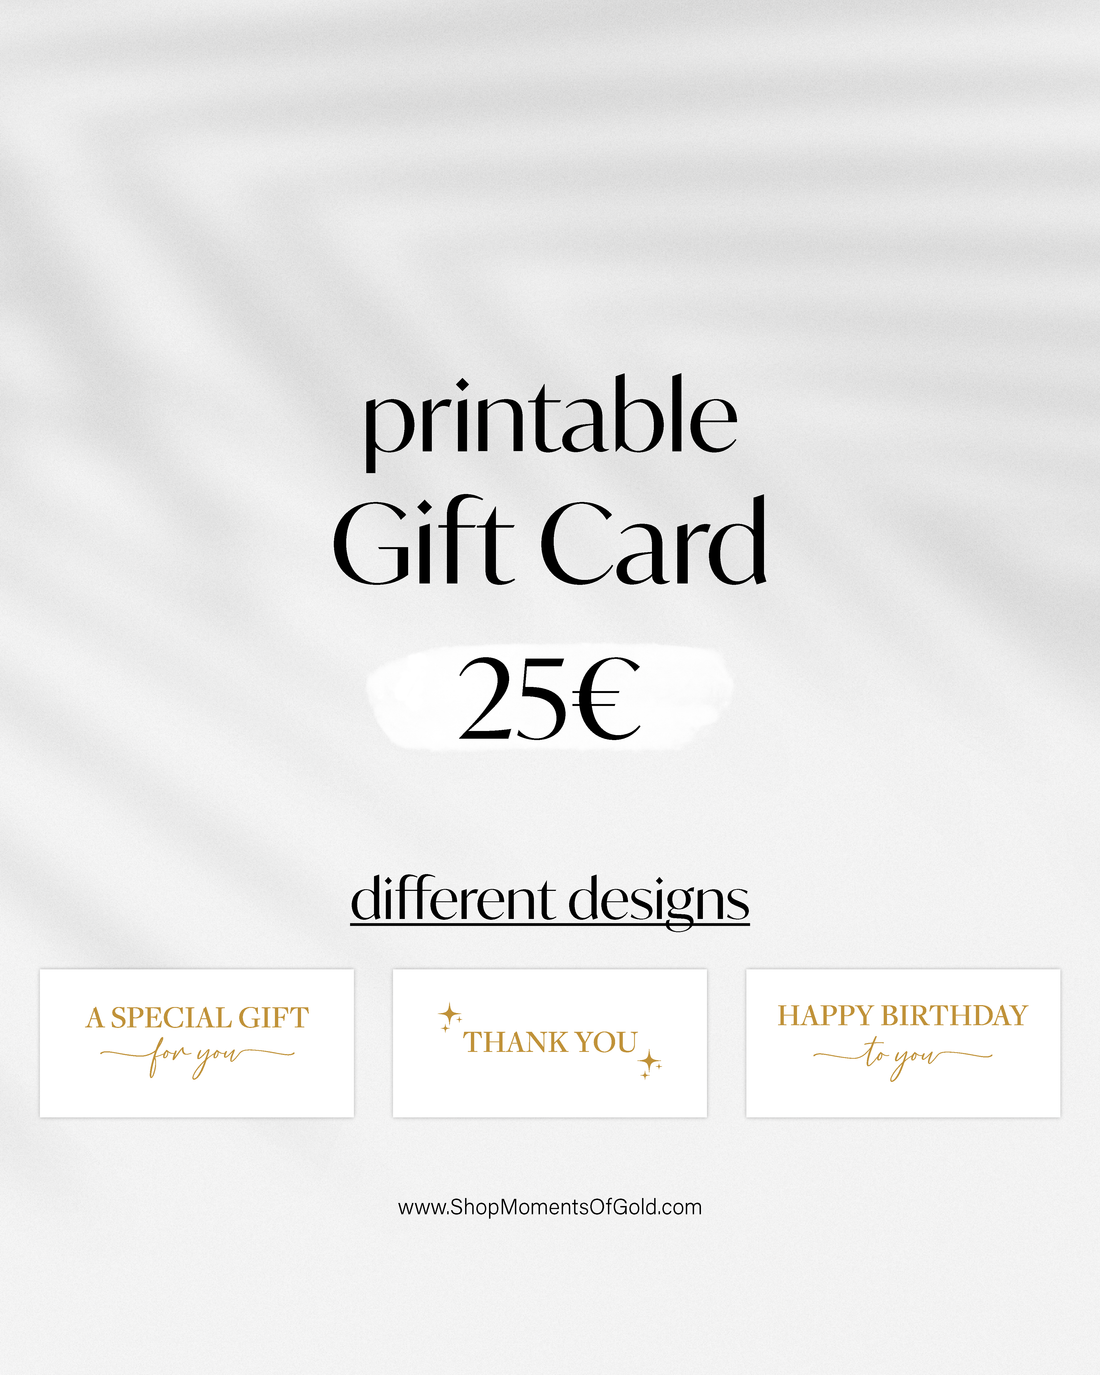 printable 25€ gift card with different designs